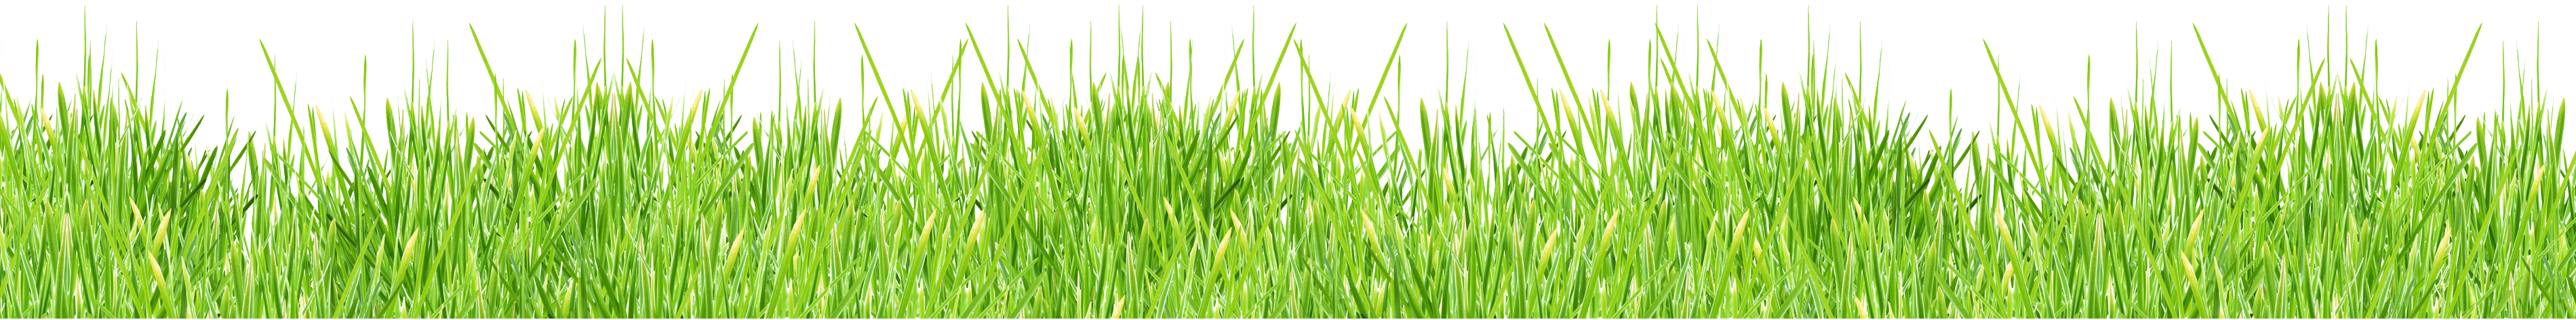 Pictures image green picture. Grass png images